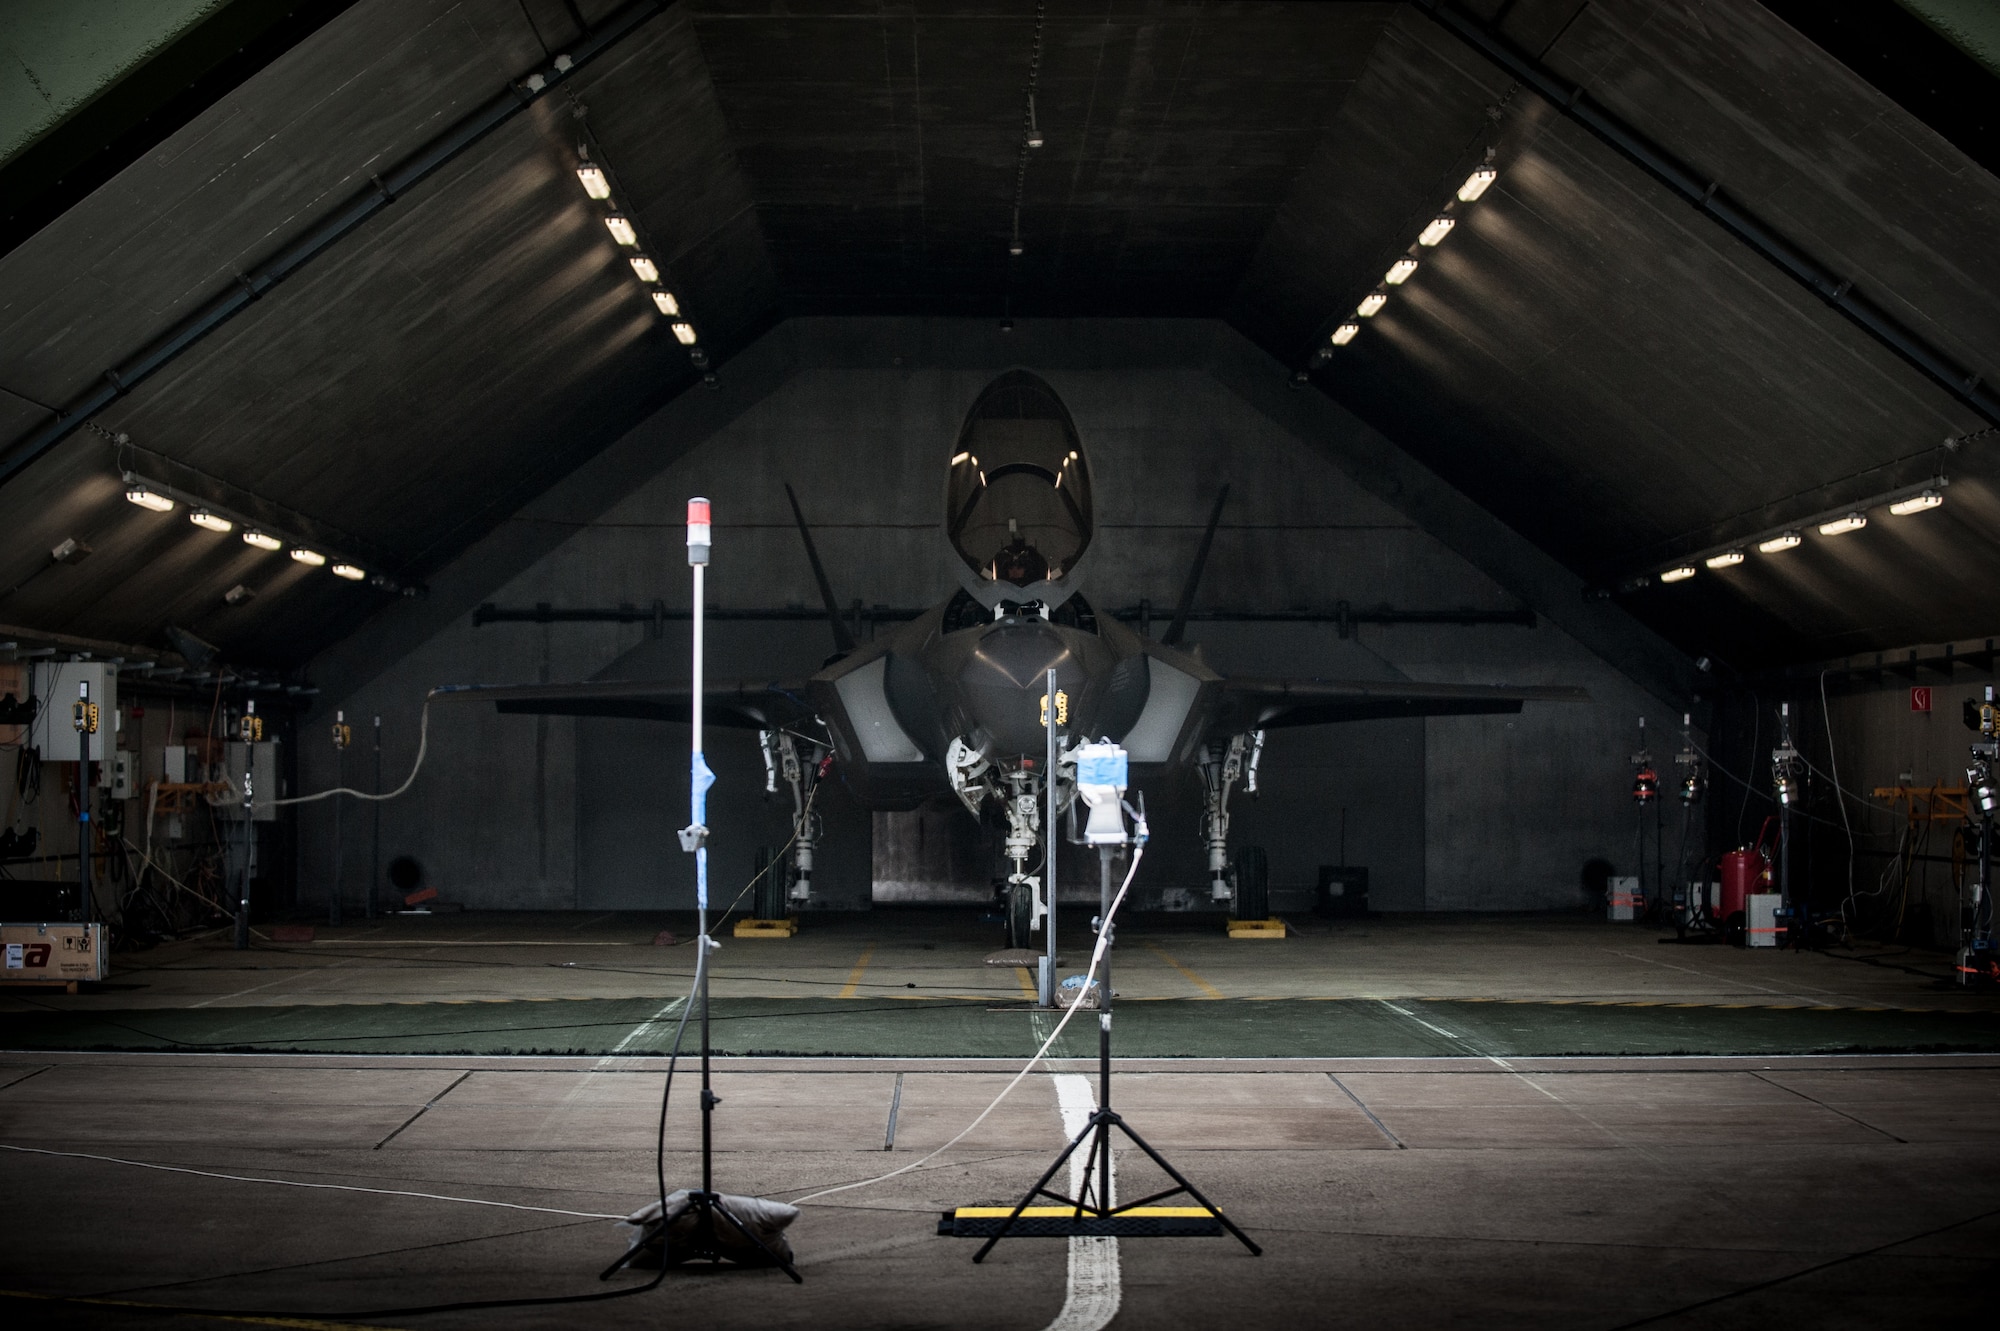 An F-35 is parked inside a hardened aircraft shelter in the Netherlands during an acoustics and air quality testing session, led by experts in the Air Force Research Laboratory’s 711th Human Performance Wing. Microphones are attached to the skin of the fighter, to the pilot in the cockpit, and to maintainer areas in front to measure and collect data for an official report. (Photo courtesy of Royal Netherlands Air Force)